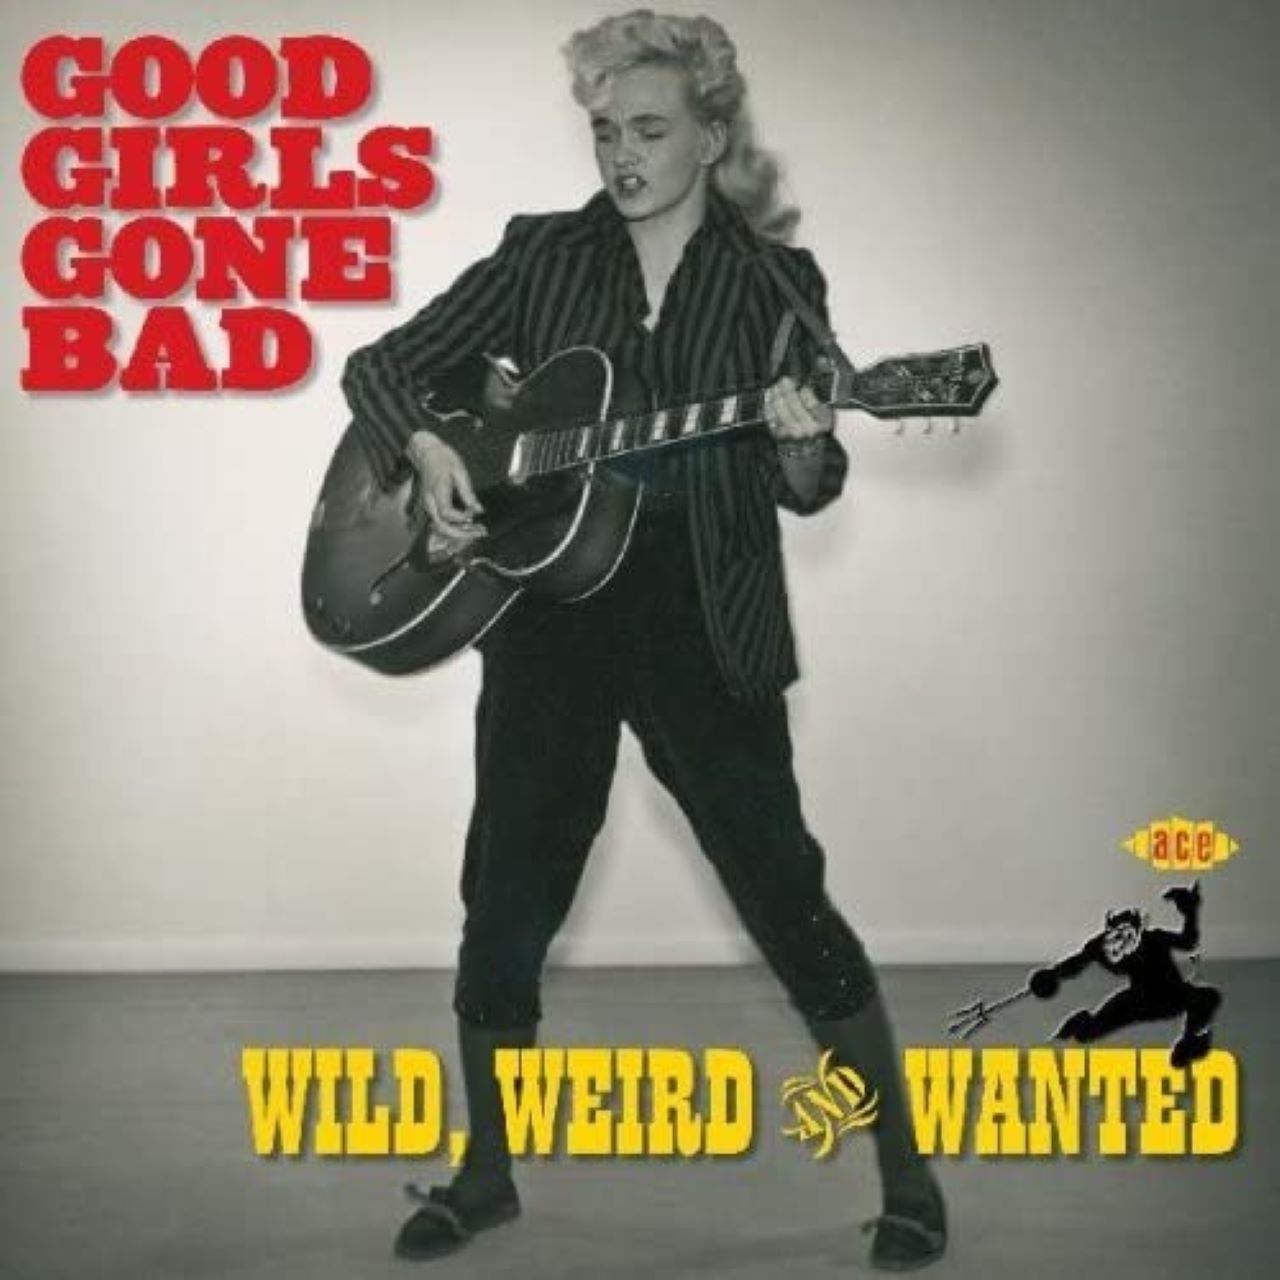 A.A.V.V. - Good Girls Gone Bad - Wild, Weird And Wanted cover album